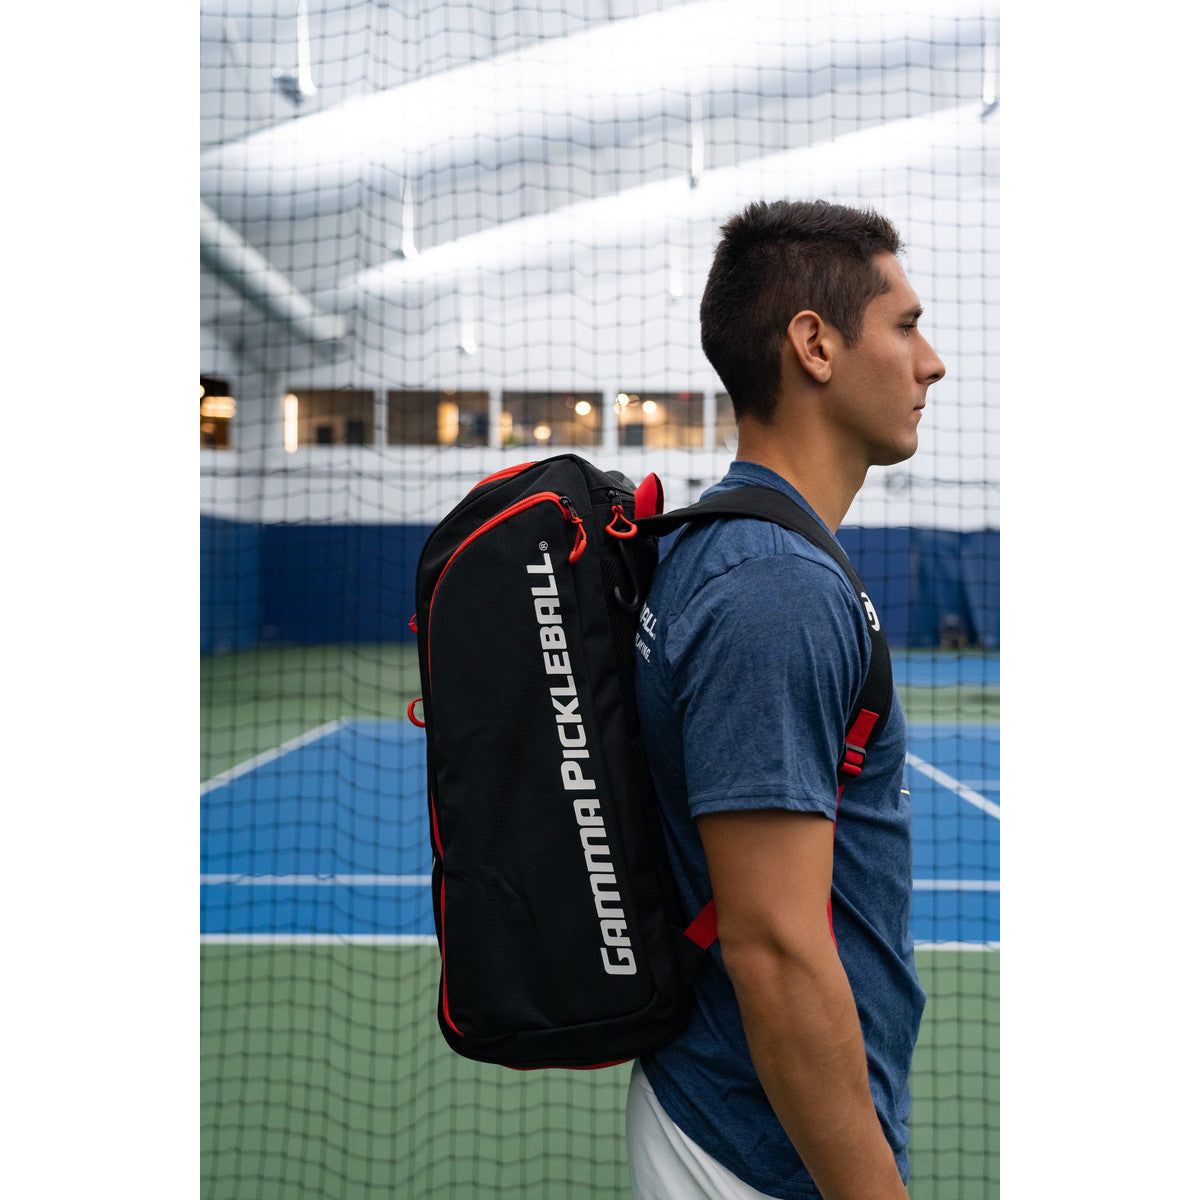 TOUR BACKPACK - Grip On Golf & Pickleball Zone